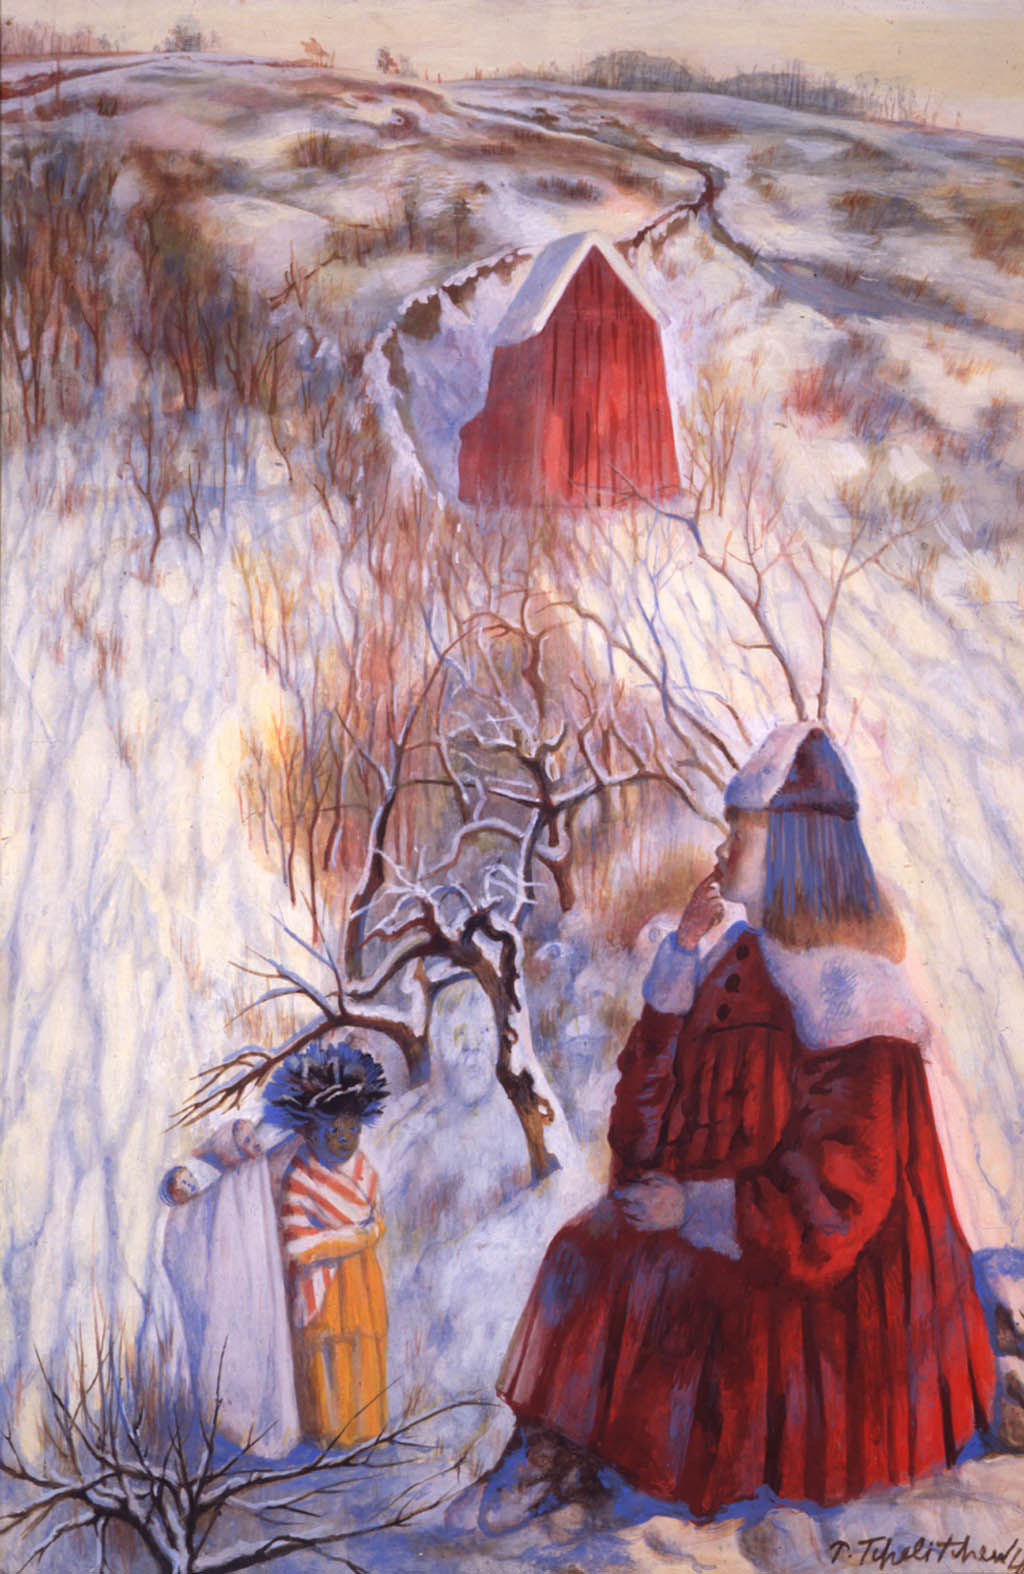 Pavel Tchelitchew - Little Red Riding Hood - 1940 gouache on paper